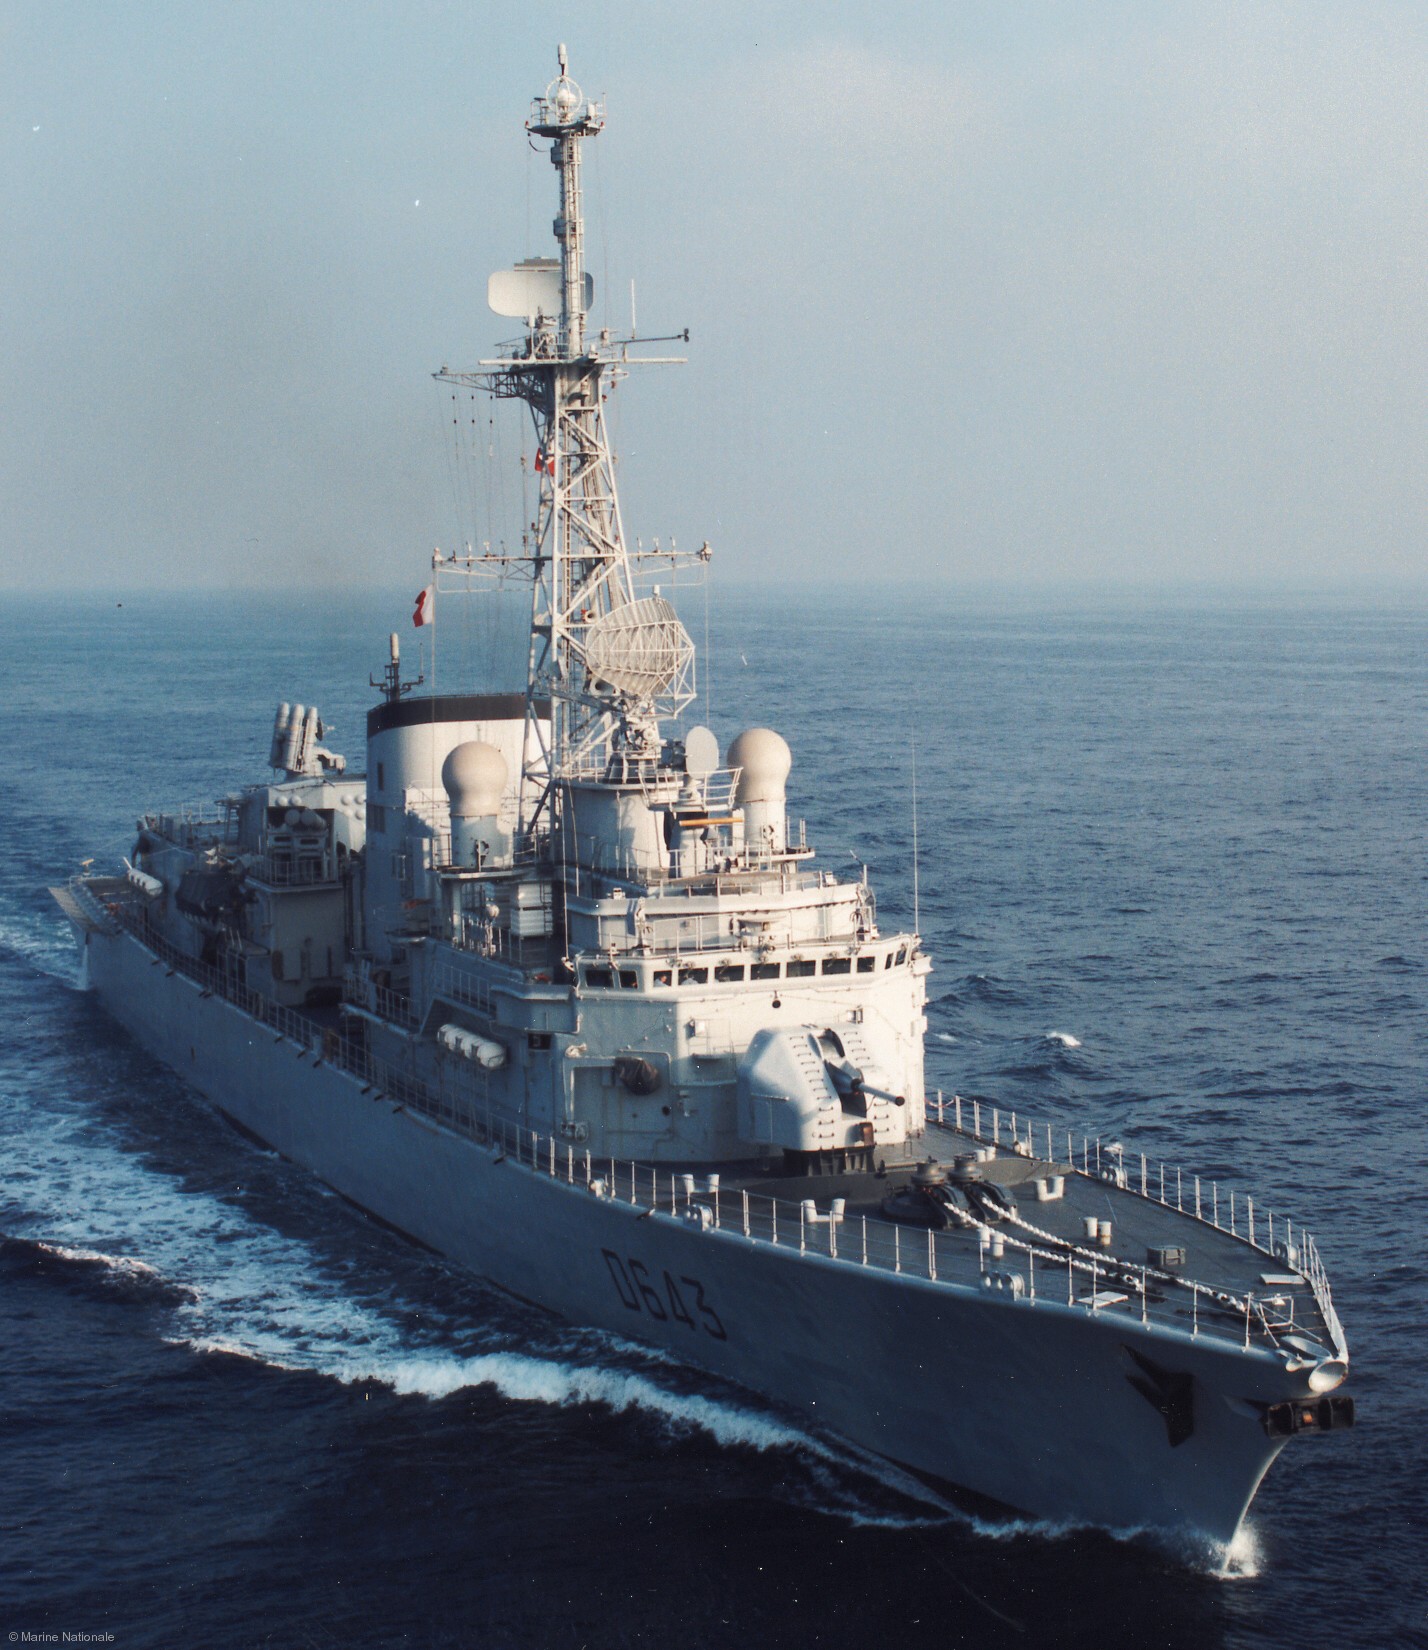 d-643 fs jean de vienne leygues class f70as asw frigate destroyer french navy marine nationale 26